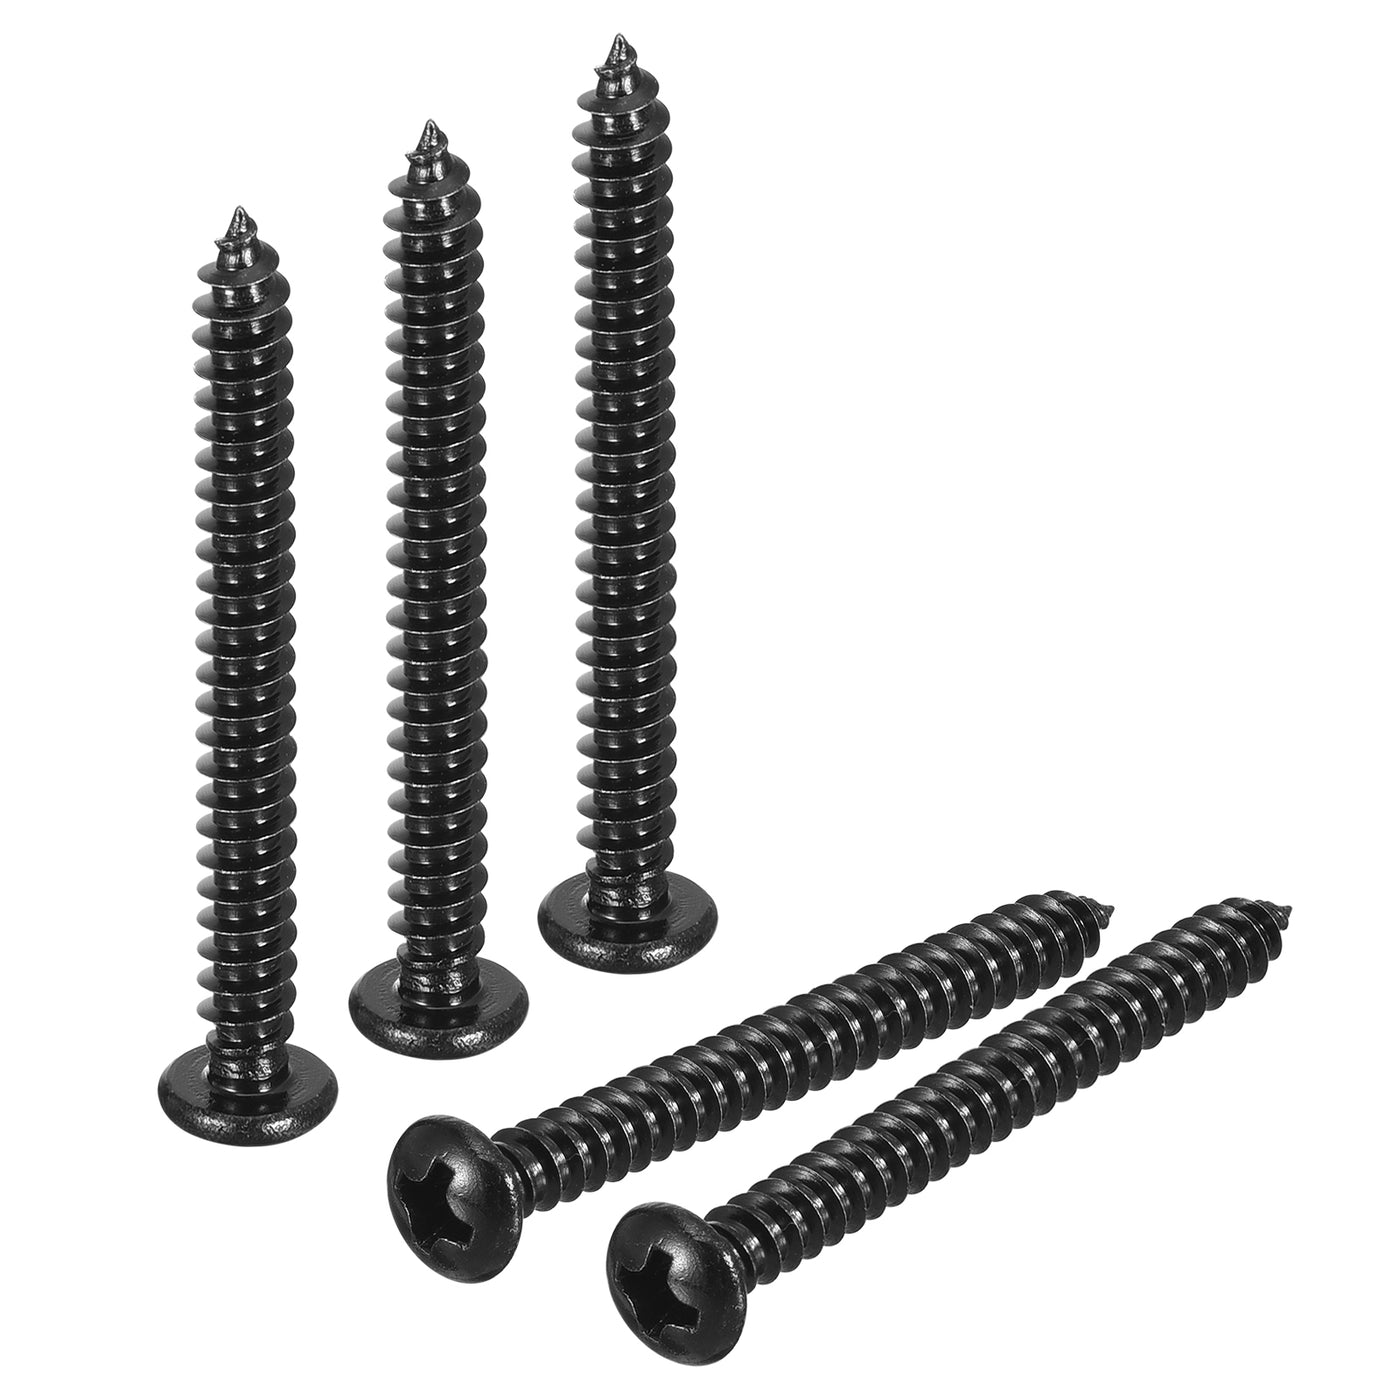 uxcell Uxcell #8 x 1-9/16" Phillips Pan Head Self-tapping Screw, 50pcs - 304 Stainless Steel Round Head Wood Screw Full Thread (Black)